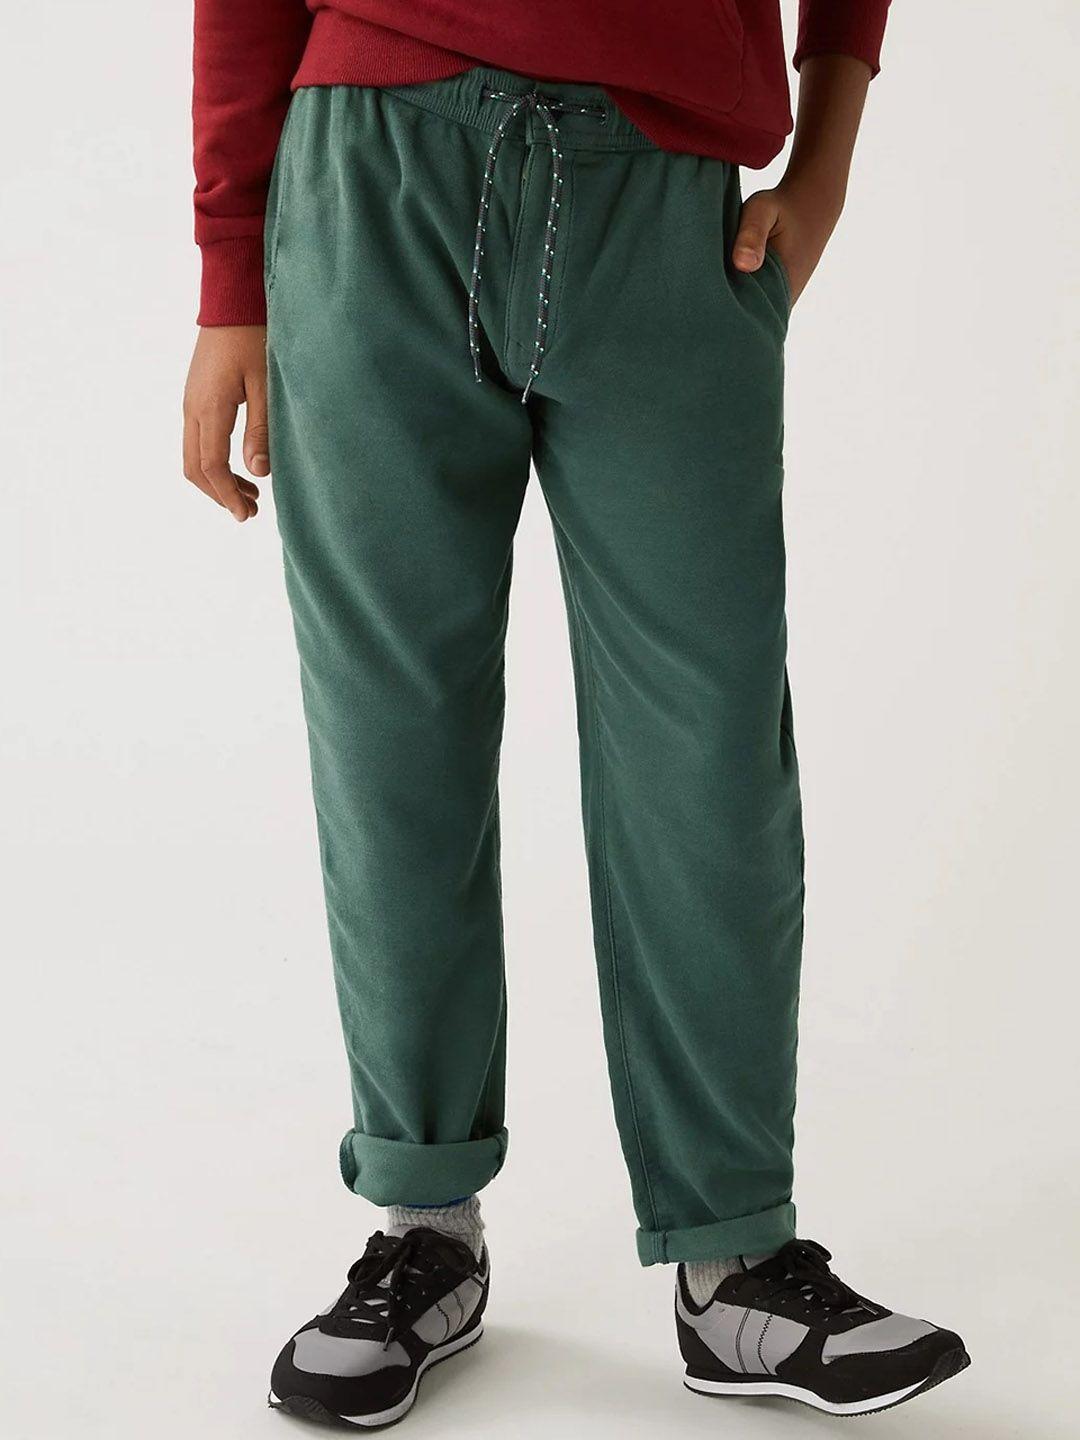 marks & spencer boys high-rise chinos trousers